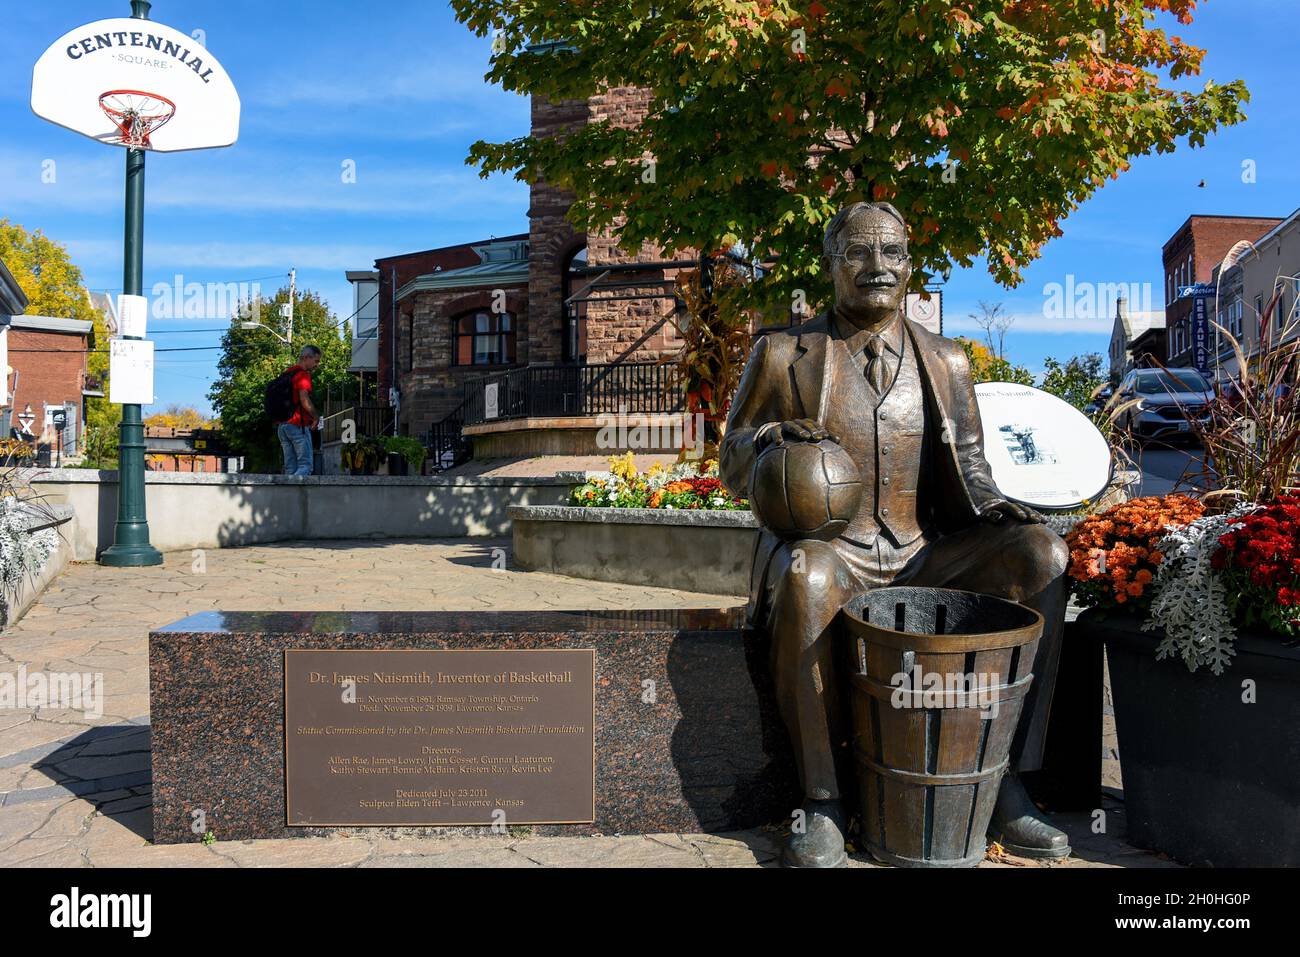 Almonte, Canada - October 1, 2021: Bronze statue of James Naismith in his hometown of Almonte, a small town in Ontario. Naismith invented the game of Stock Photo